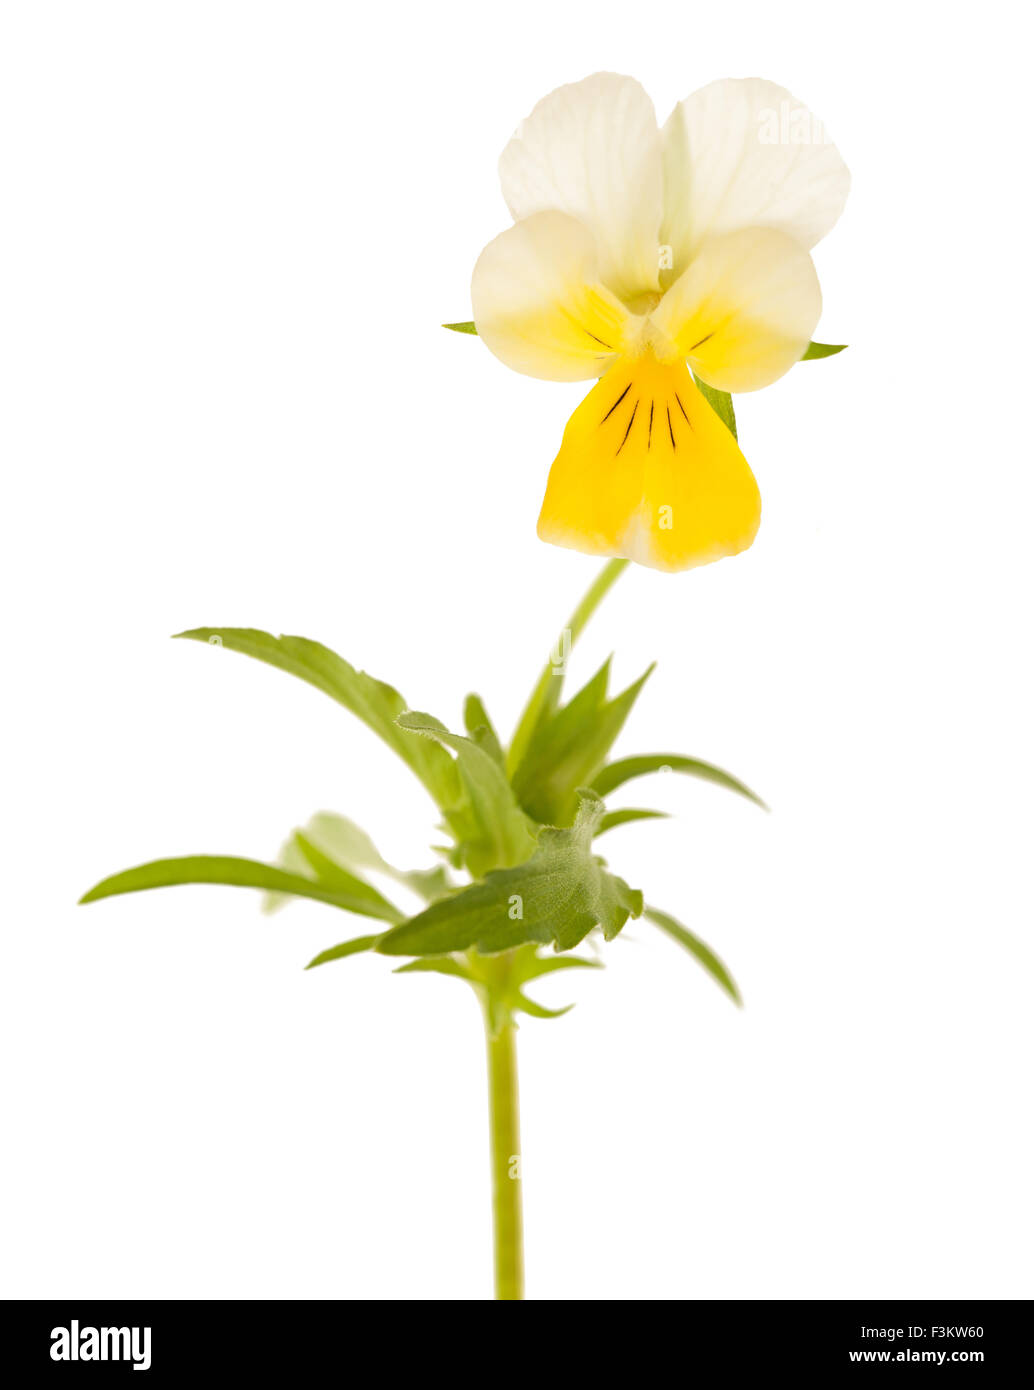 Pansy flower isolated on white Banque D'Images